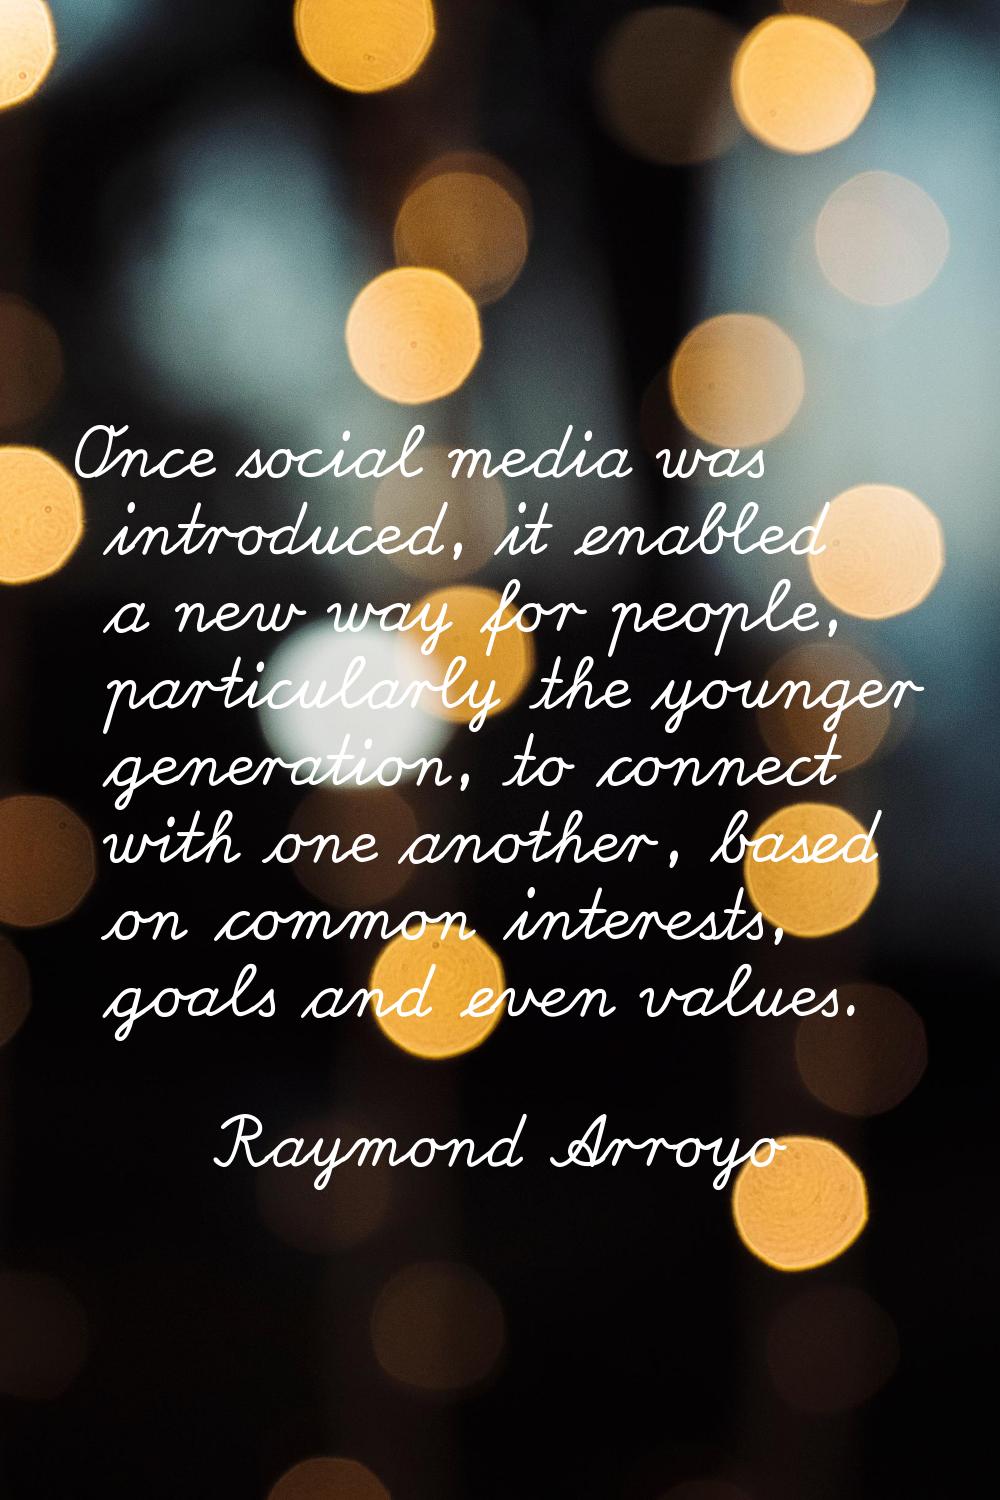 Once social media was introduced, it enabled a new way for people, particularly the younger generat